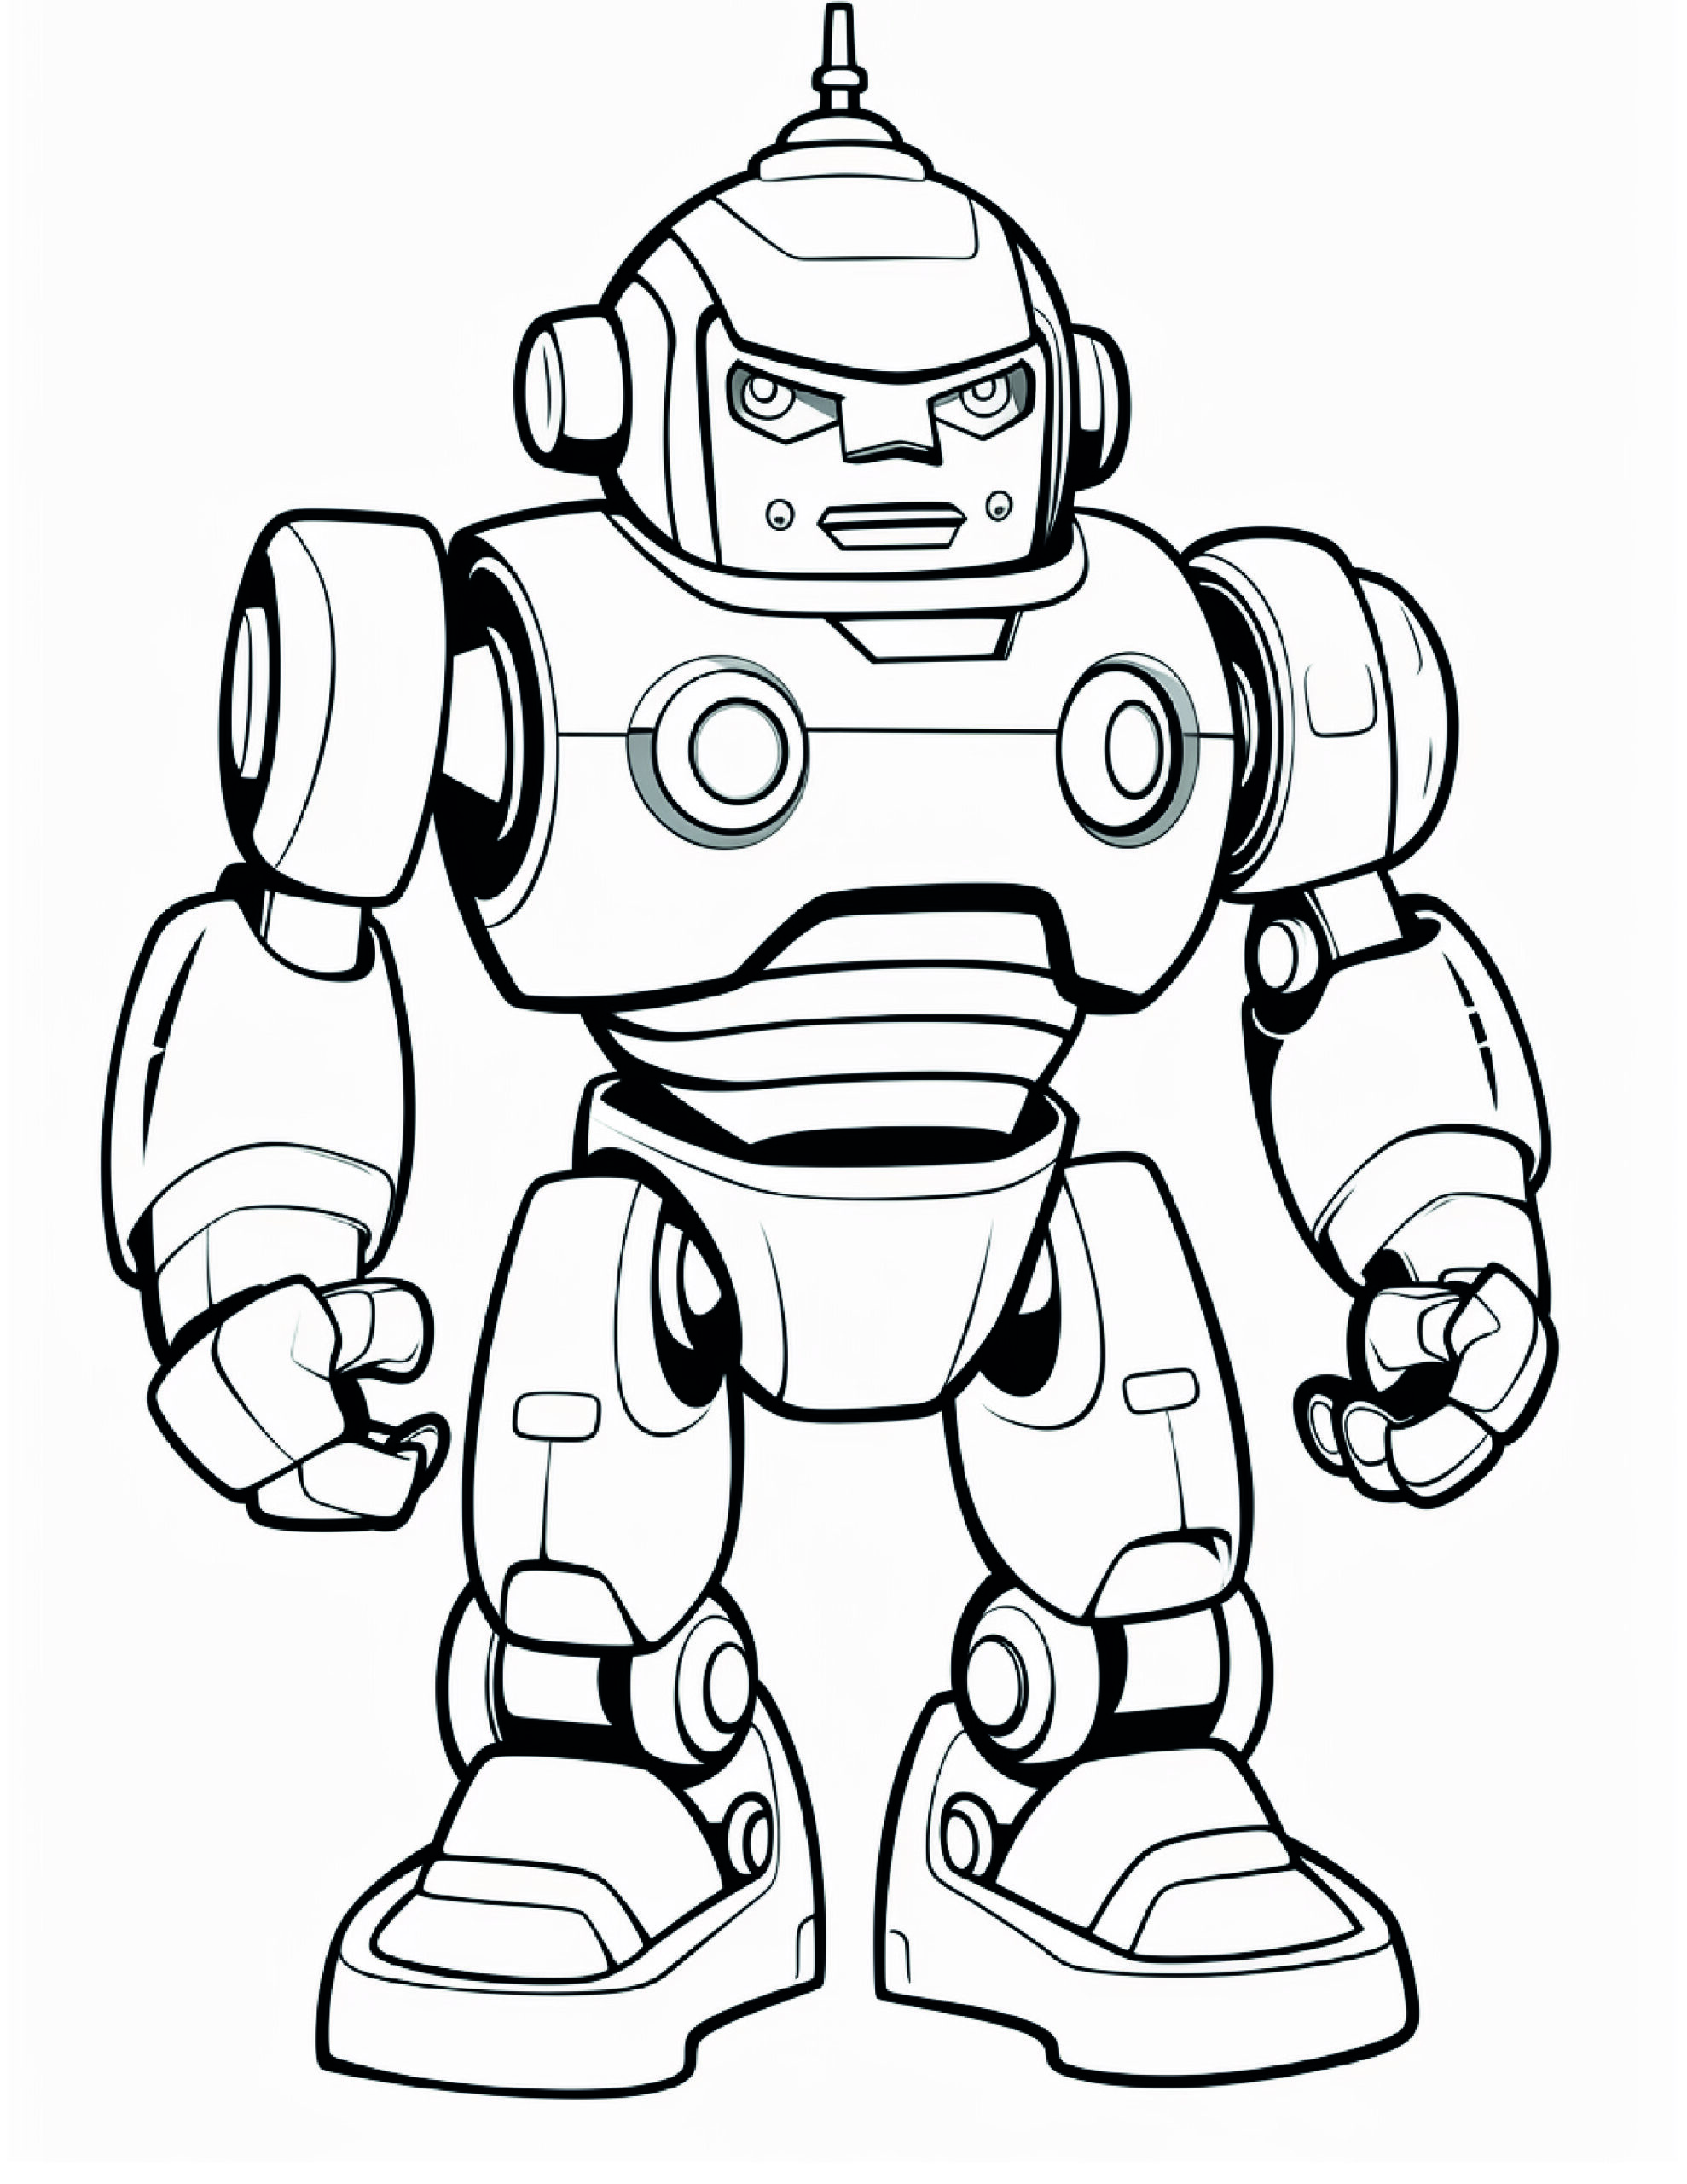 Robot Coloring Page 17 - A line drawing of a fighting robot. 